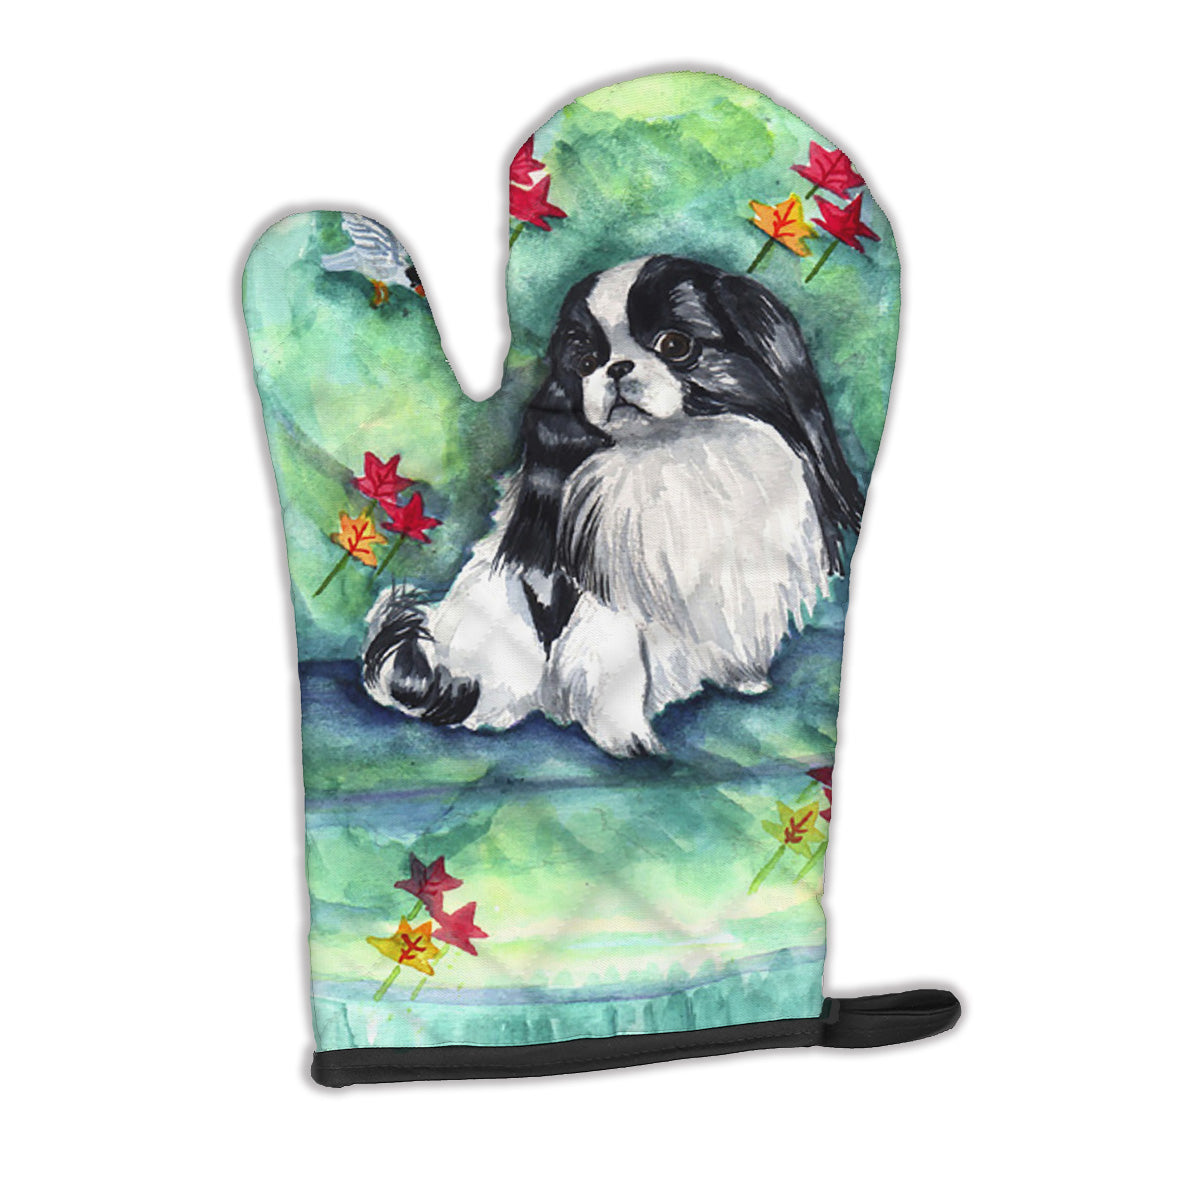 Japanese Chin in Momma's Chair Oven Mitt 7034OVMT